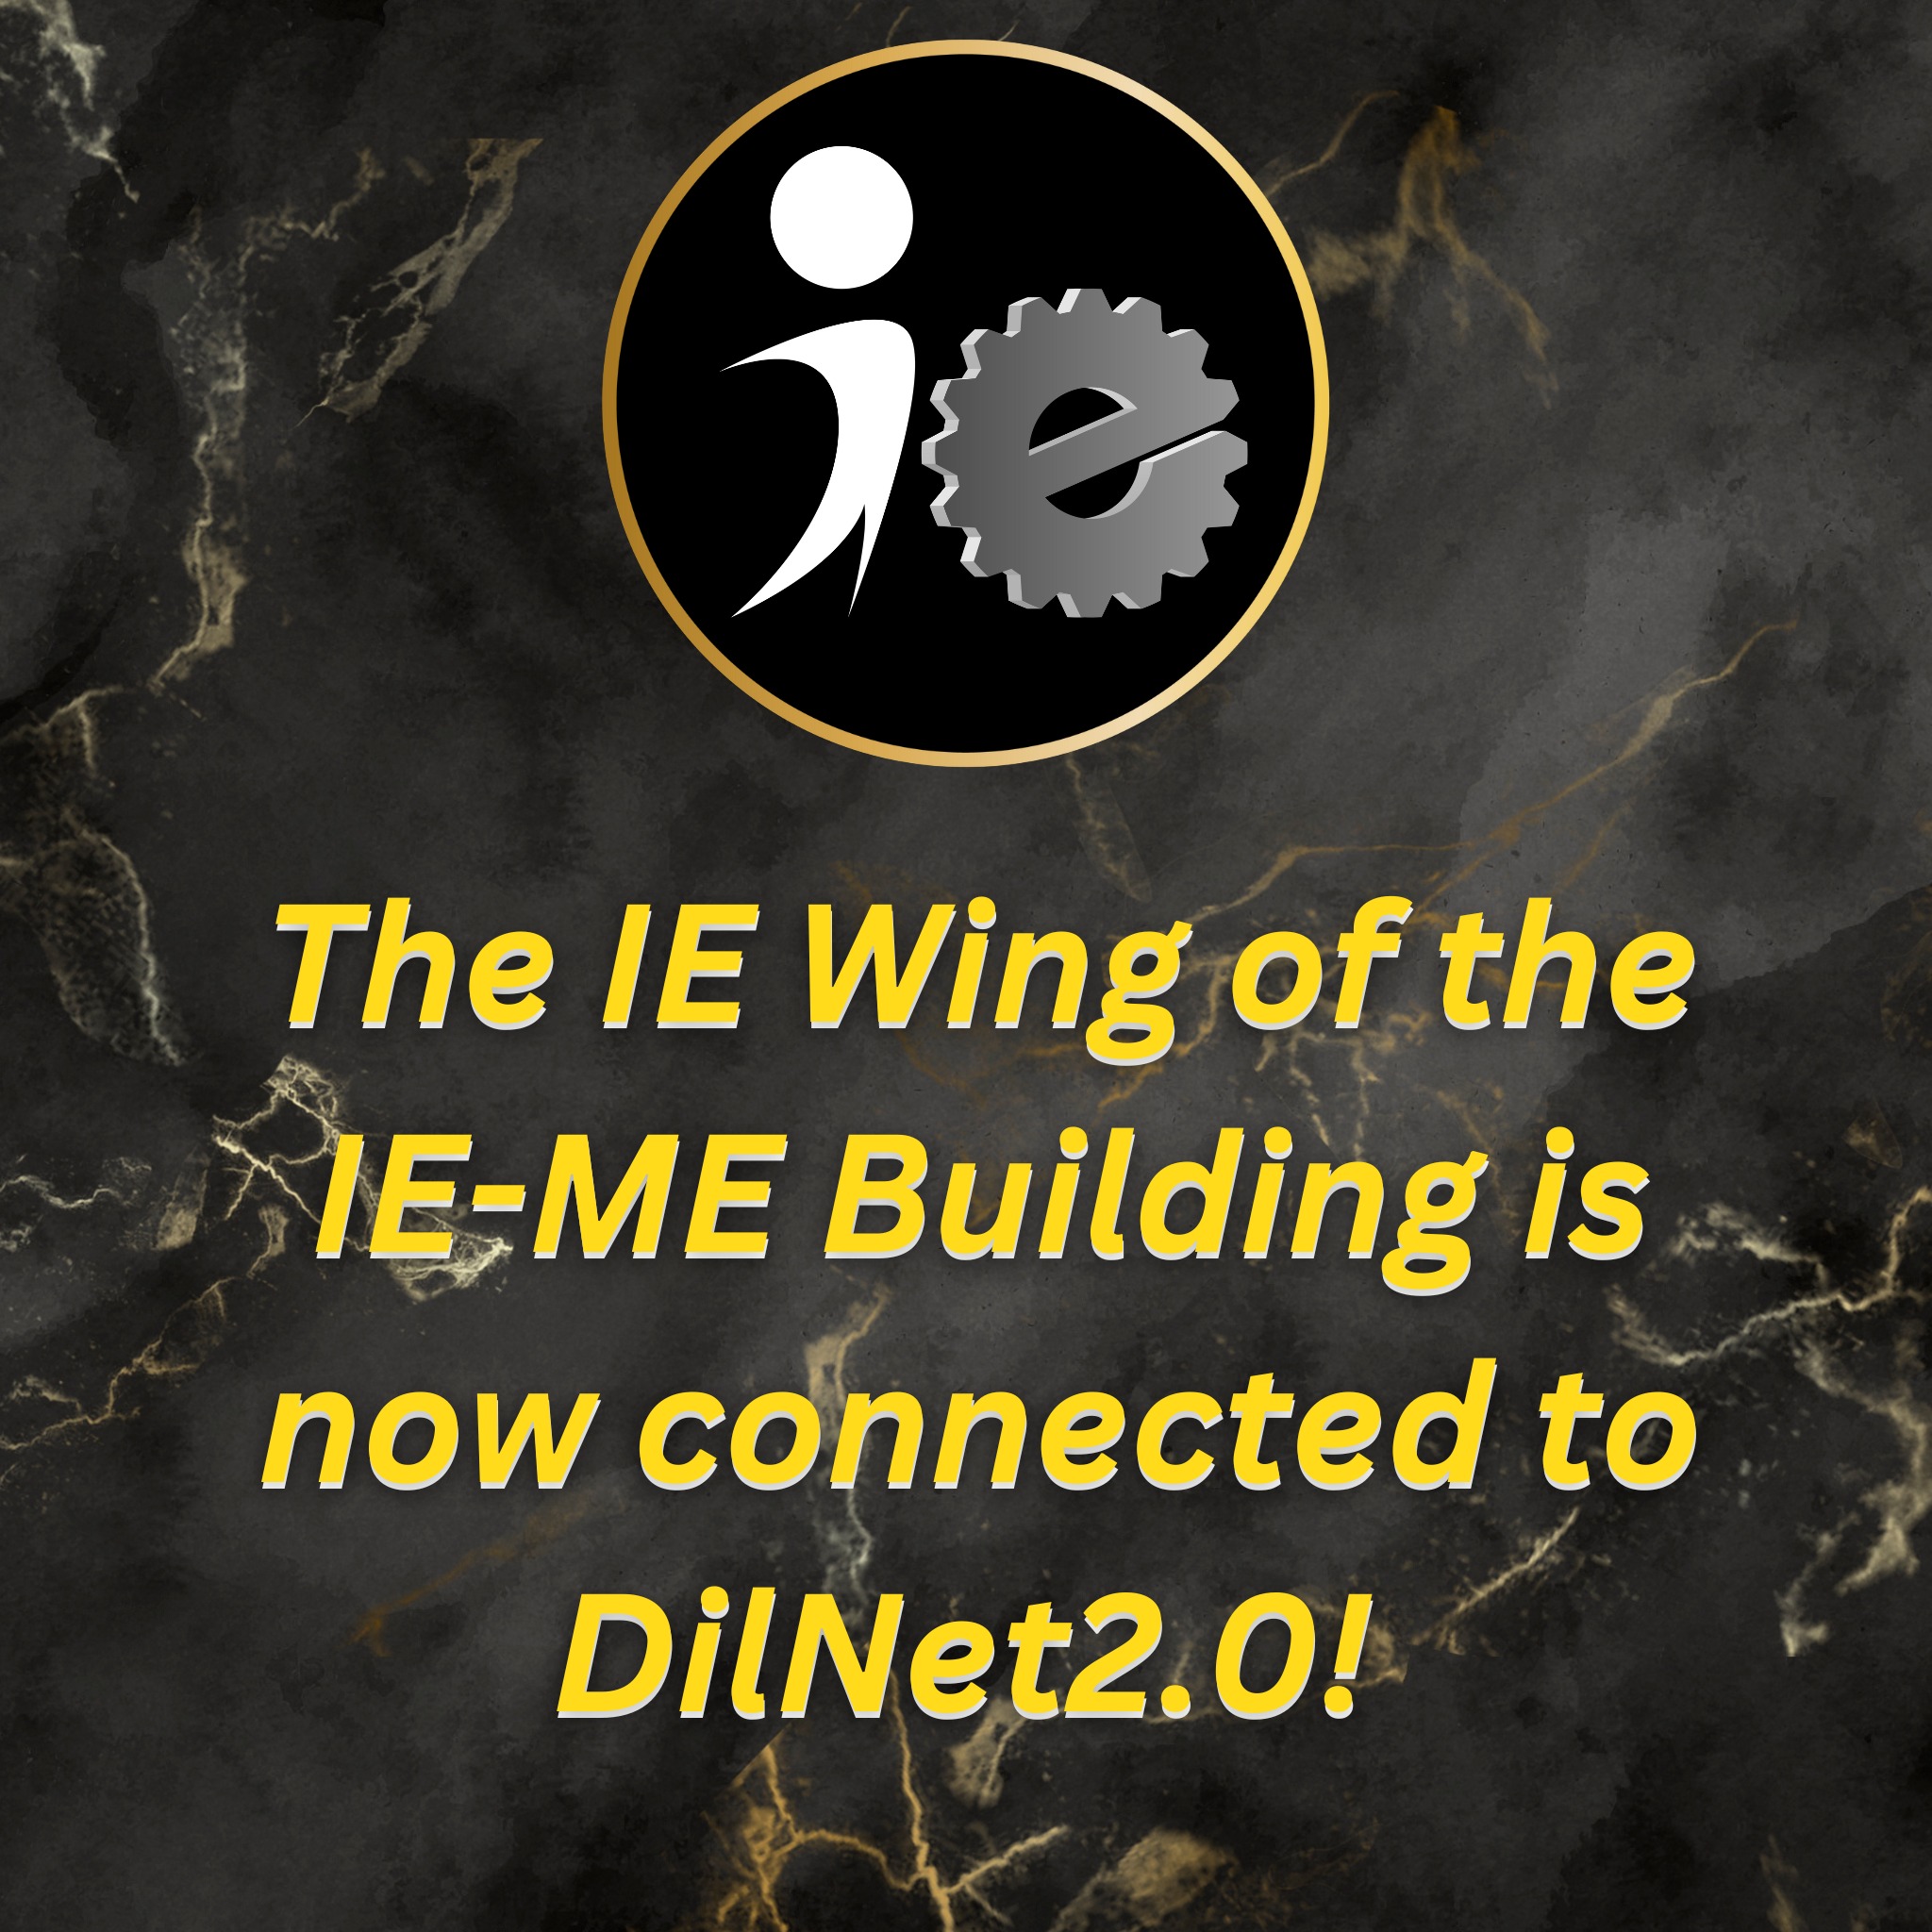 DilNet2.0 Arrives in the IE Wing: Improved Connectivity for Students…